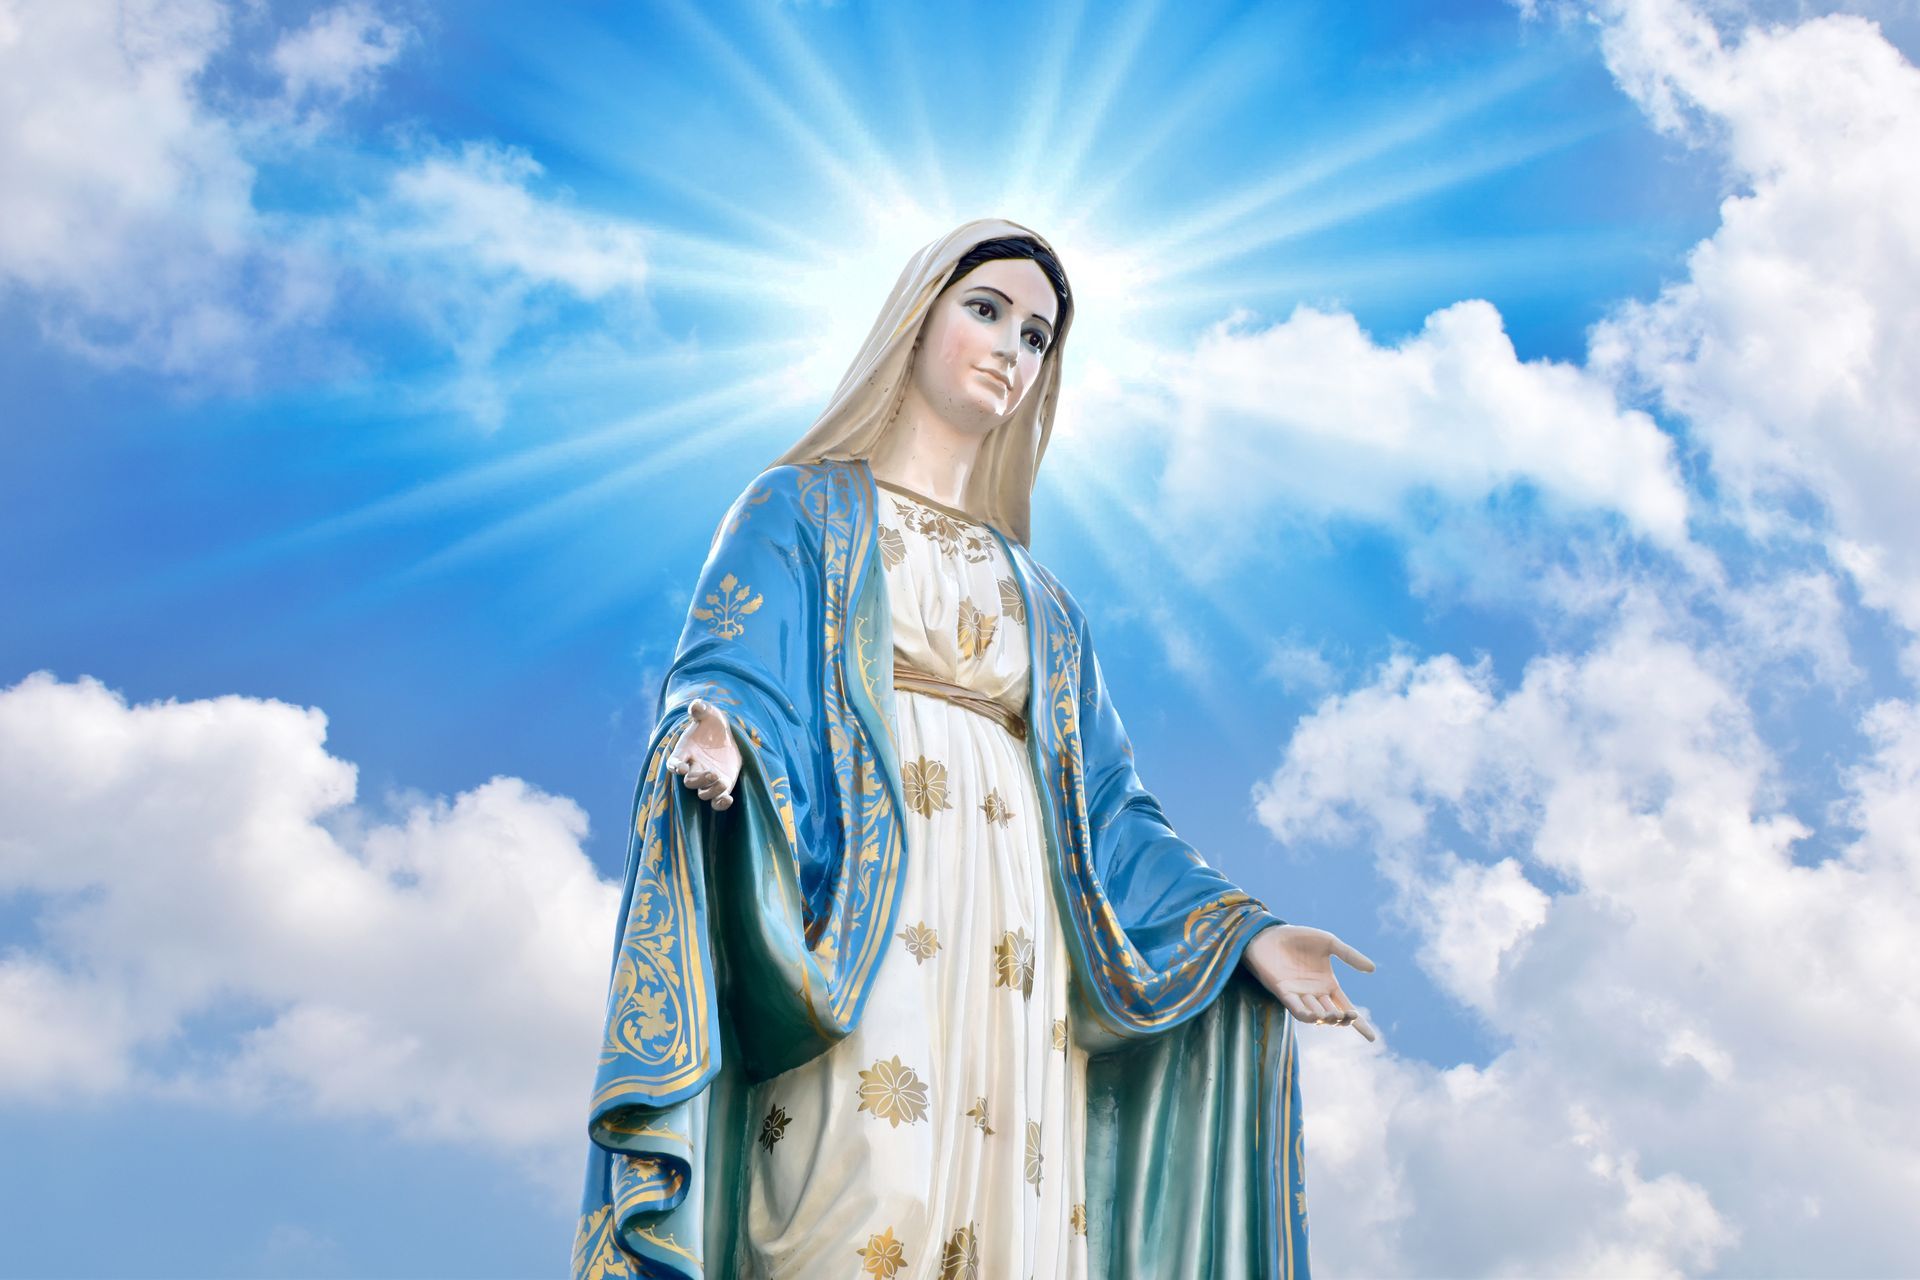 a statue of the virgin mary stands in front of a cloudy sky